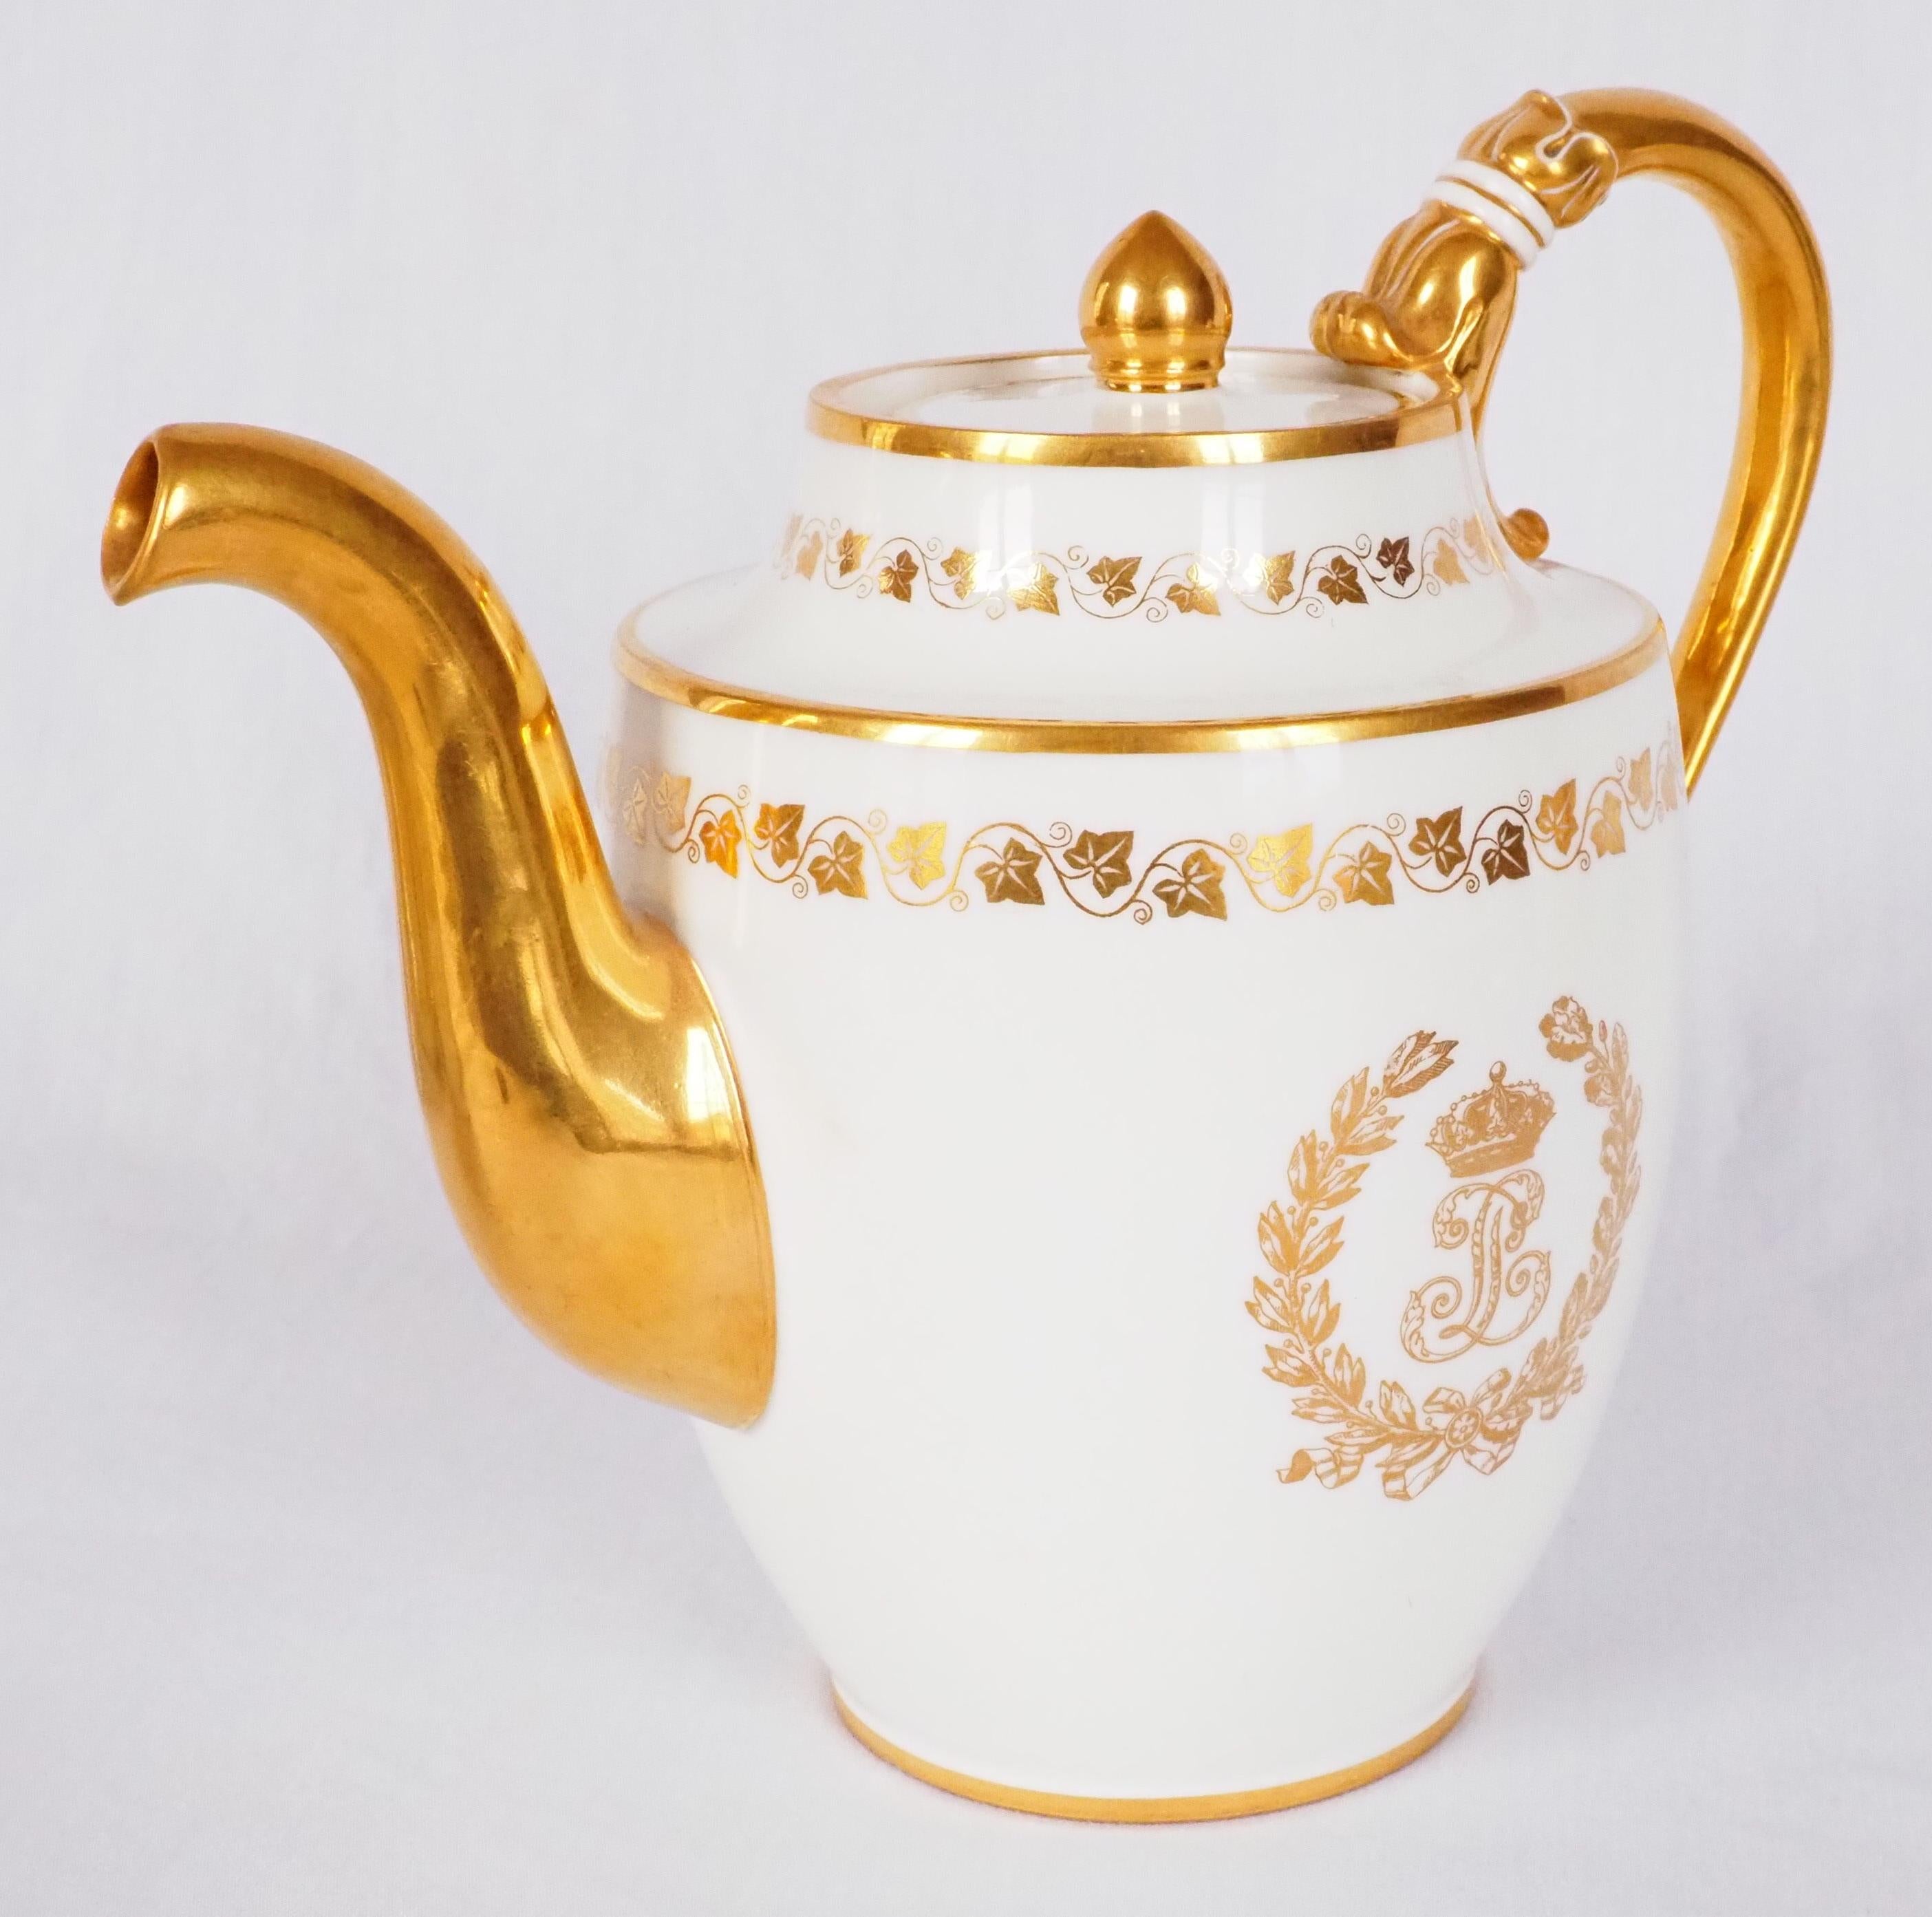 French Sevres Manufacture Porcelain Coffee Pot, Royal Coffee Set from Chateau De Bizy